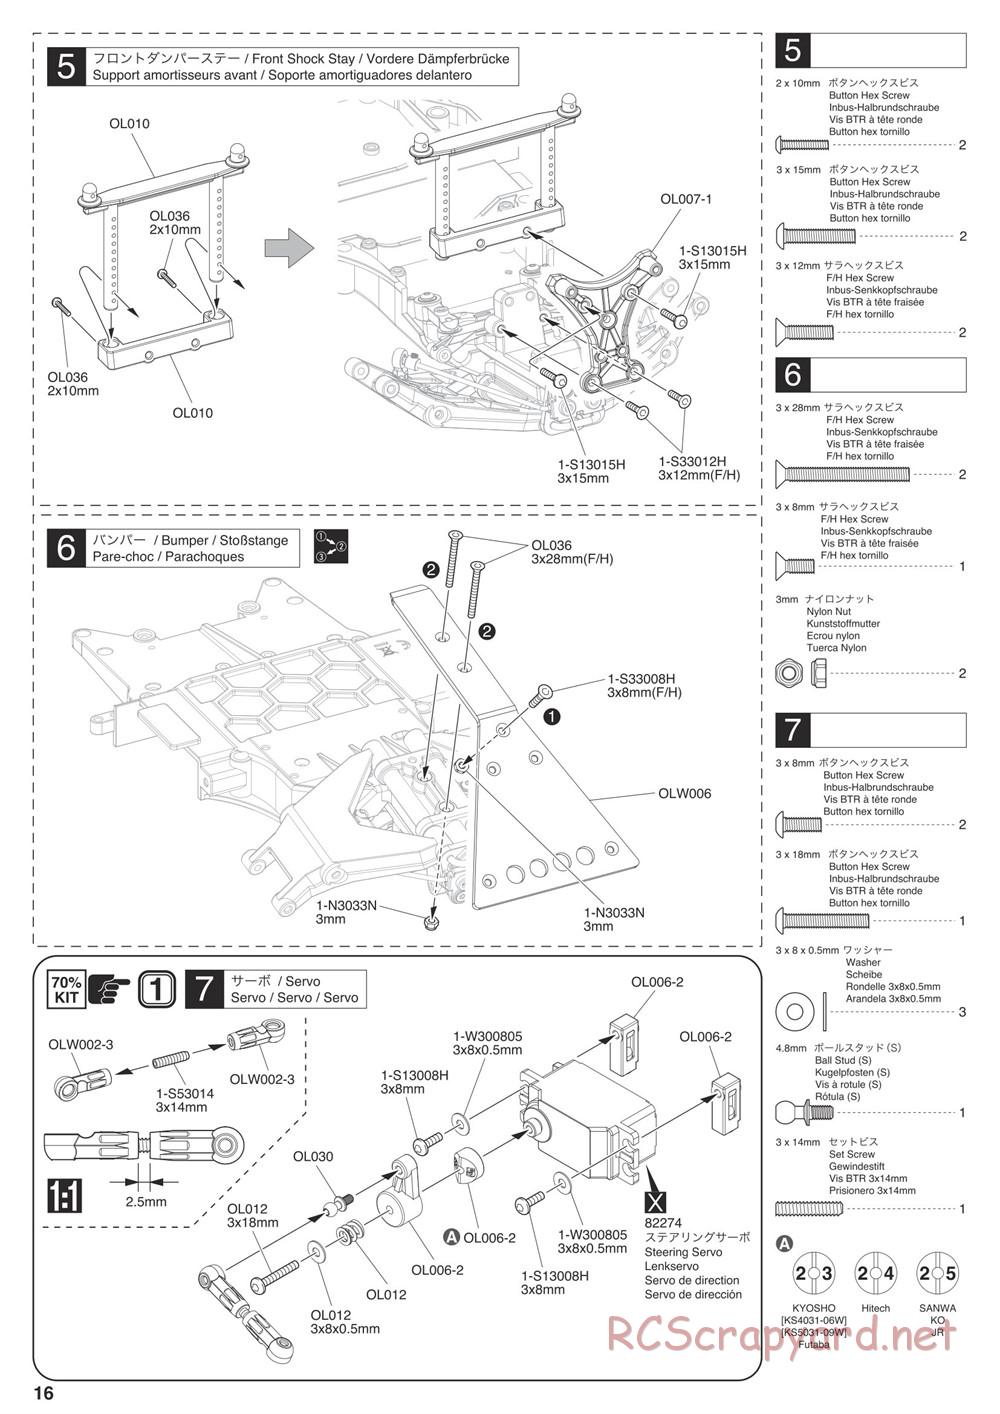 Kyosho - Outlaw Rampage Pro - Manual - Page 16